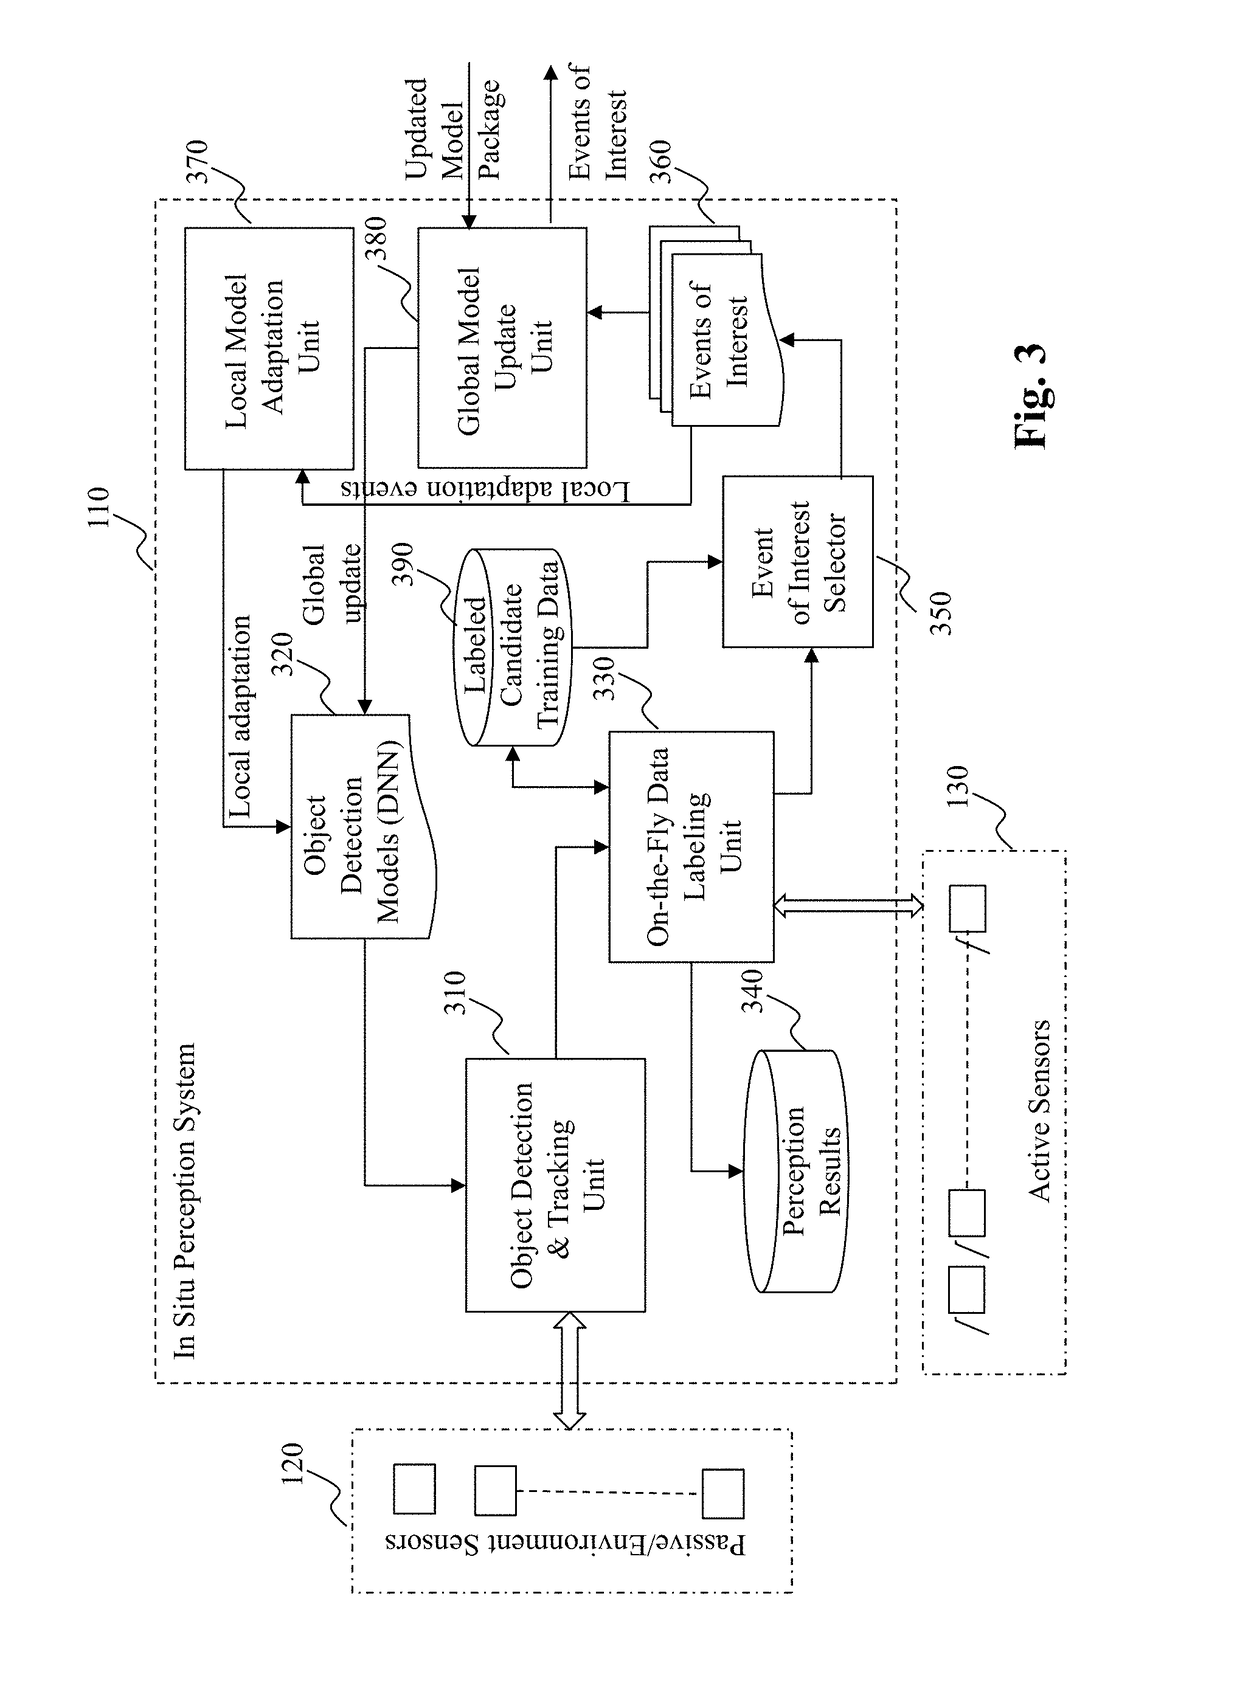 Method and system for integrated global and distributed learning in autonomous driving vehicles